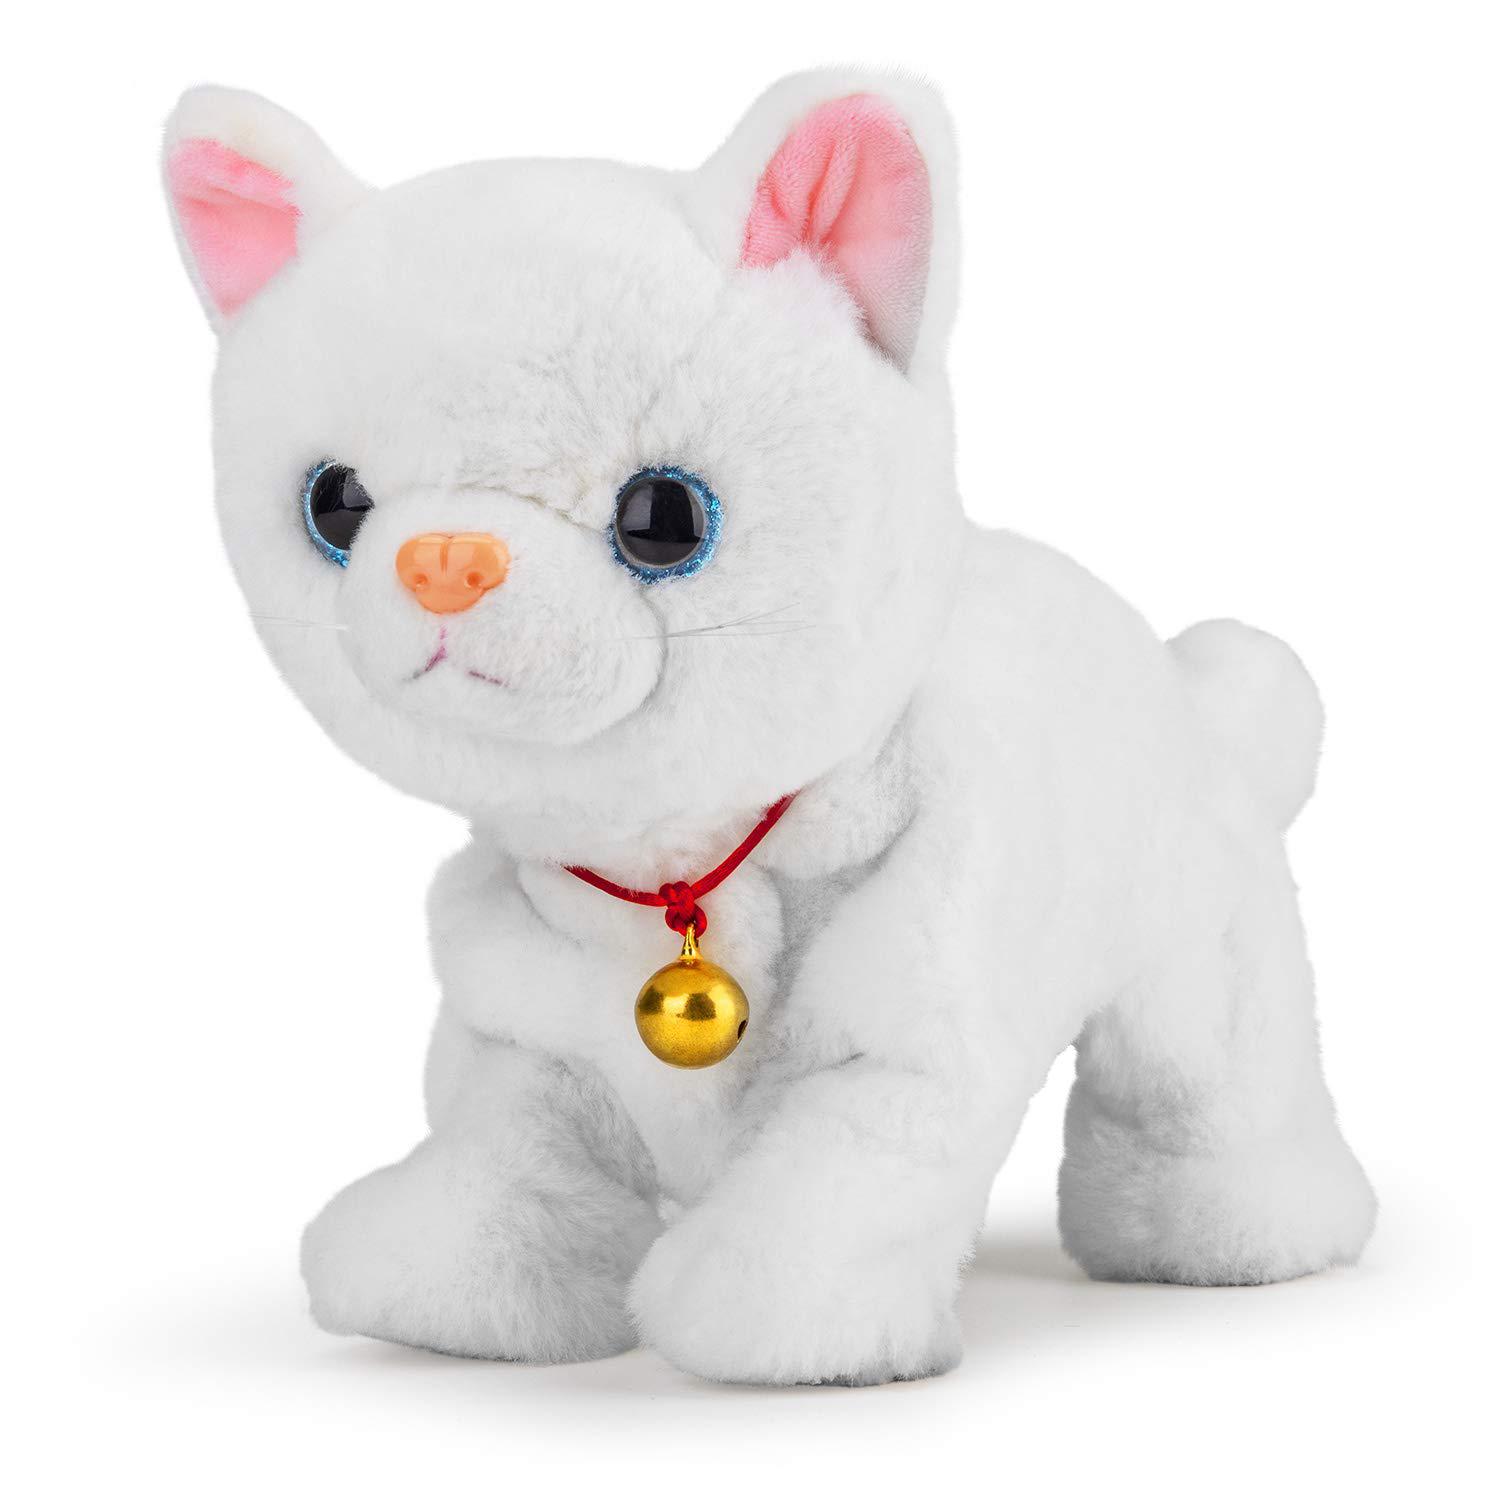 smalody interactive electronic plush toy - upgrade robot talking cat toys with led light eyes, animals sound control electron